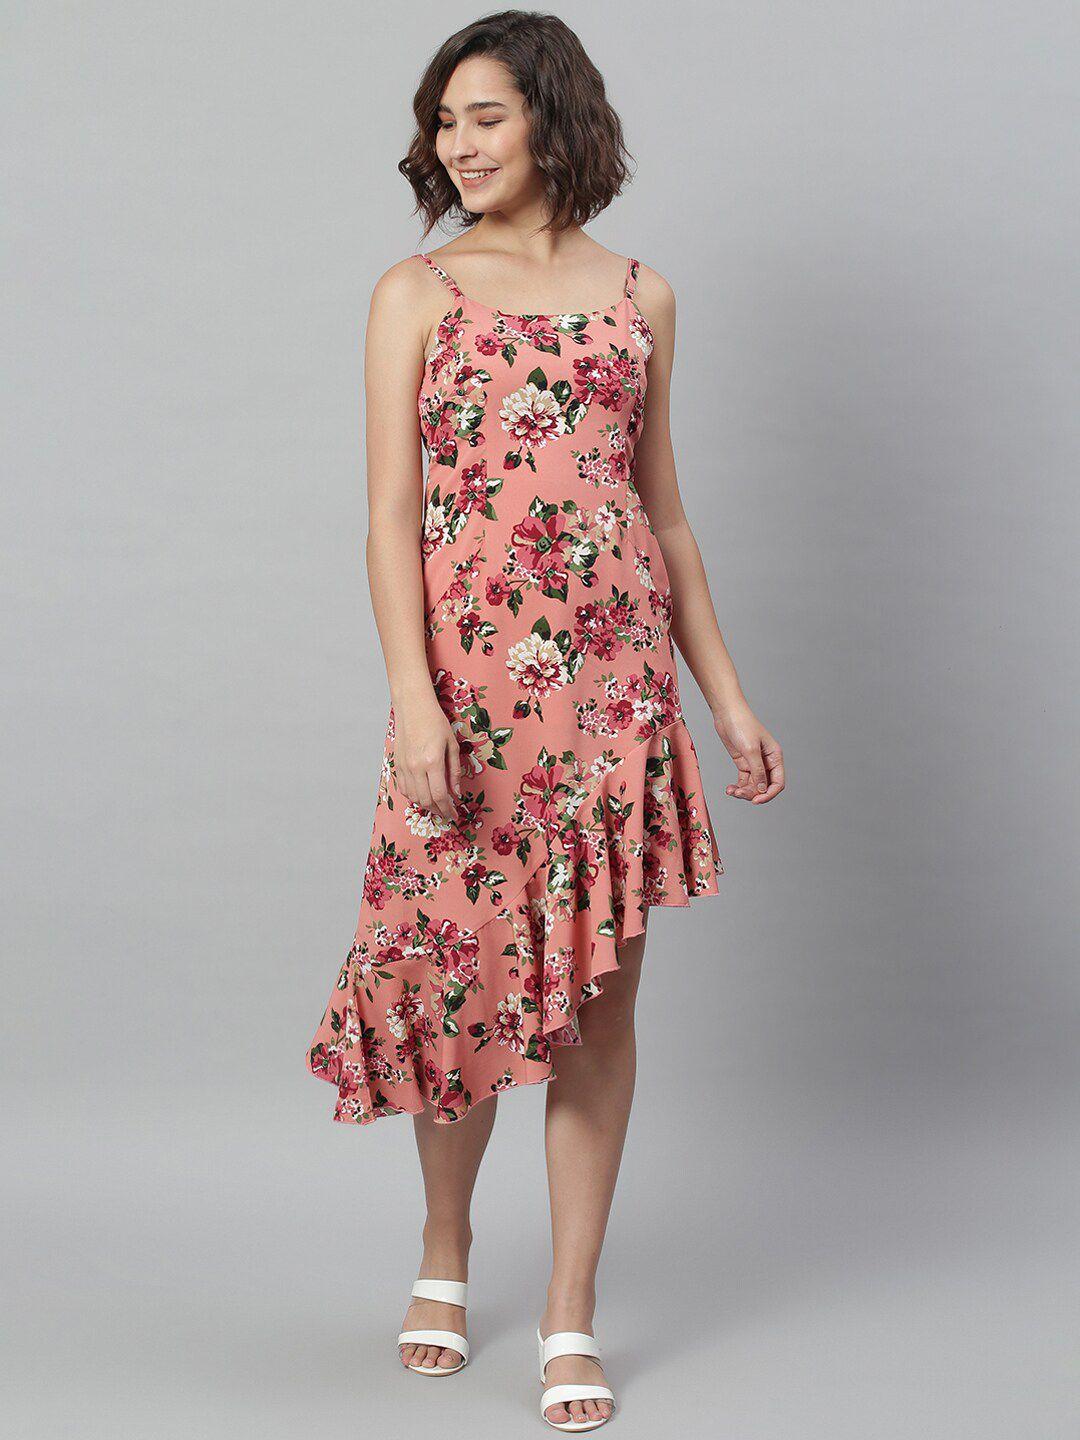 kassually pink floral crepe a-line midi dress